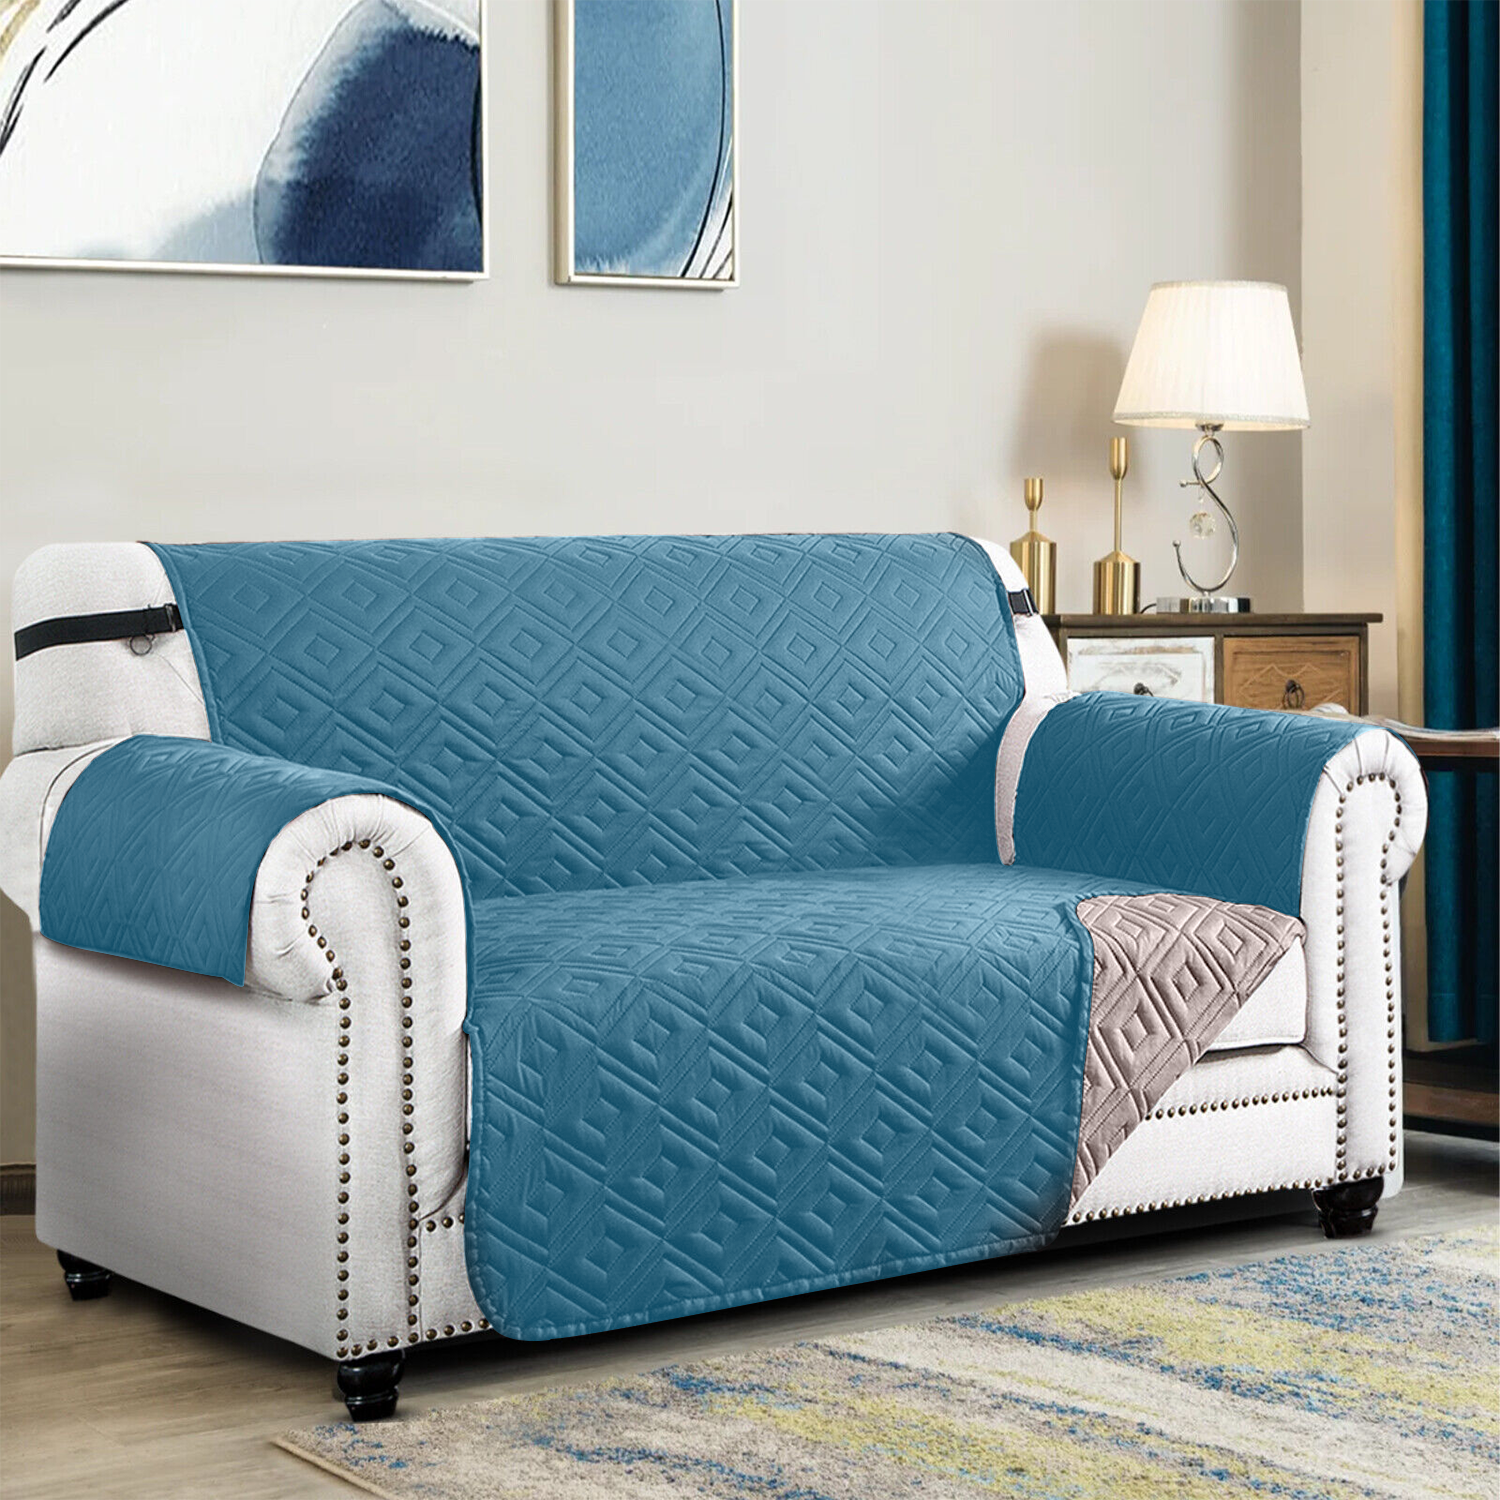 Waterproof Cover For Sofa Teal